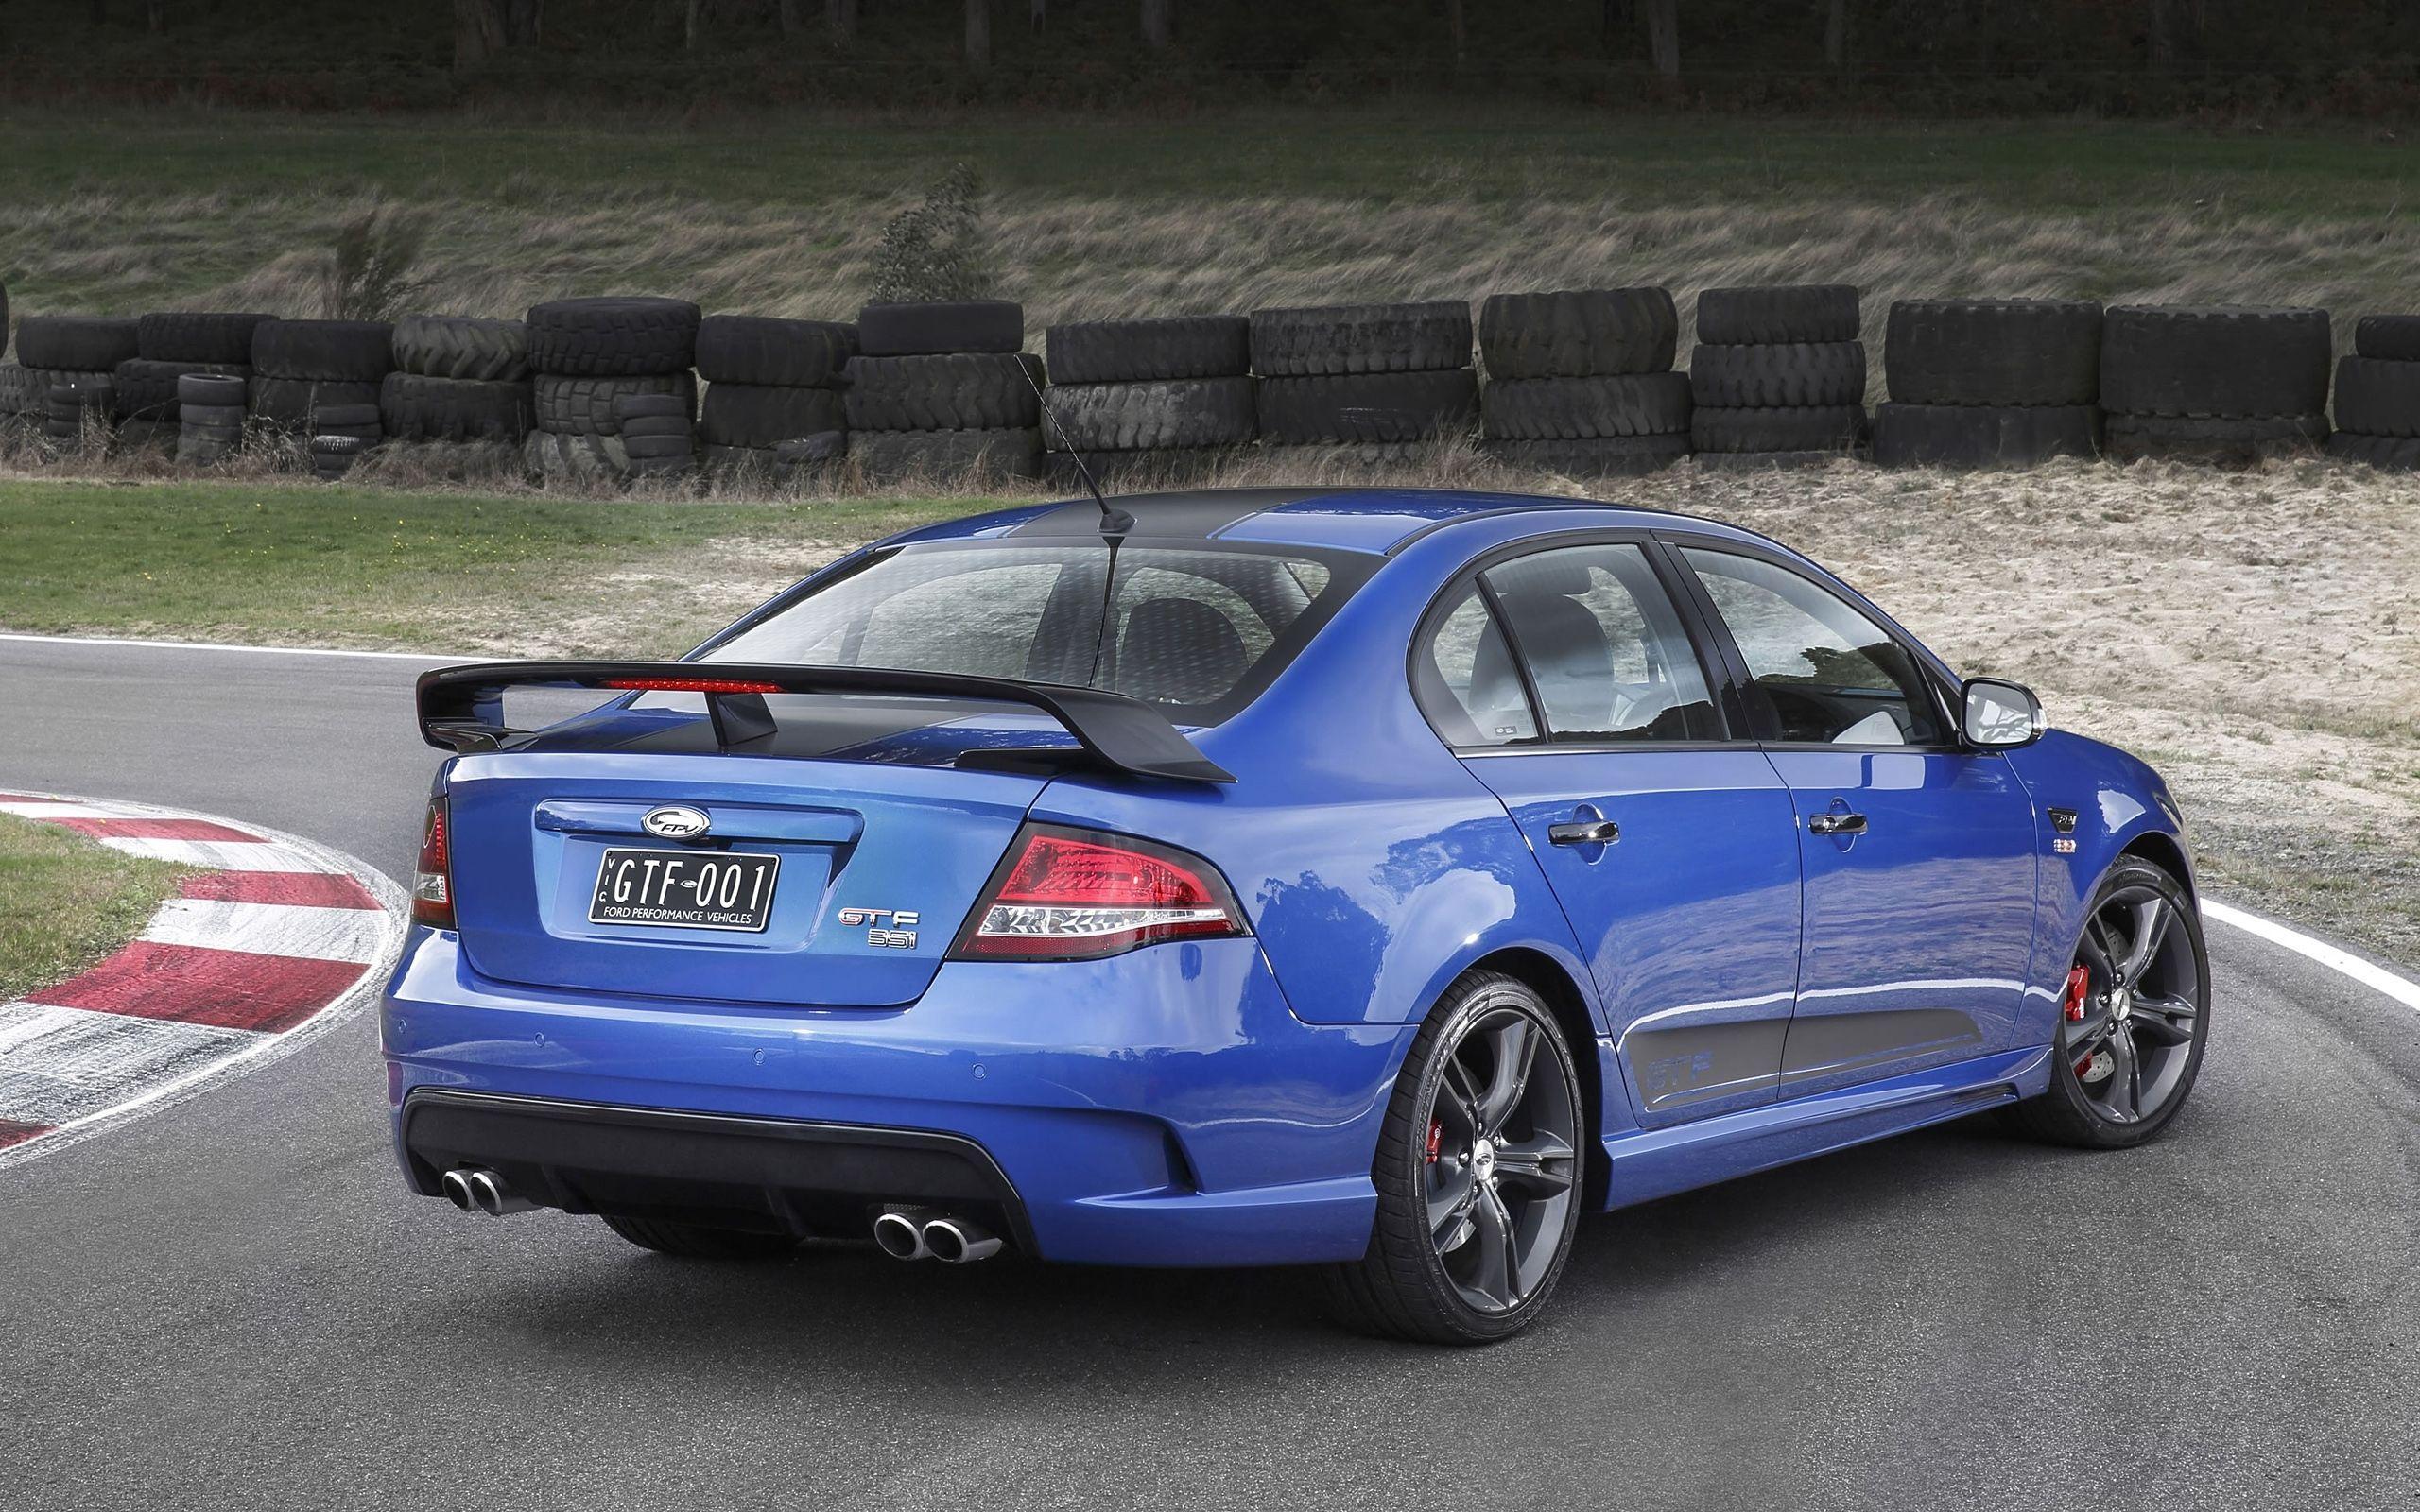 Ford Falcon Xr6 Wallpapers